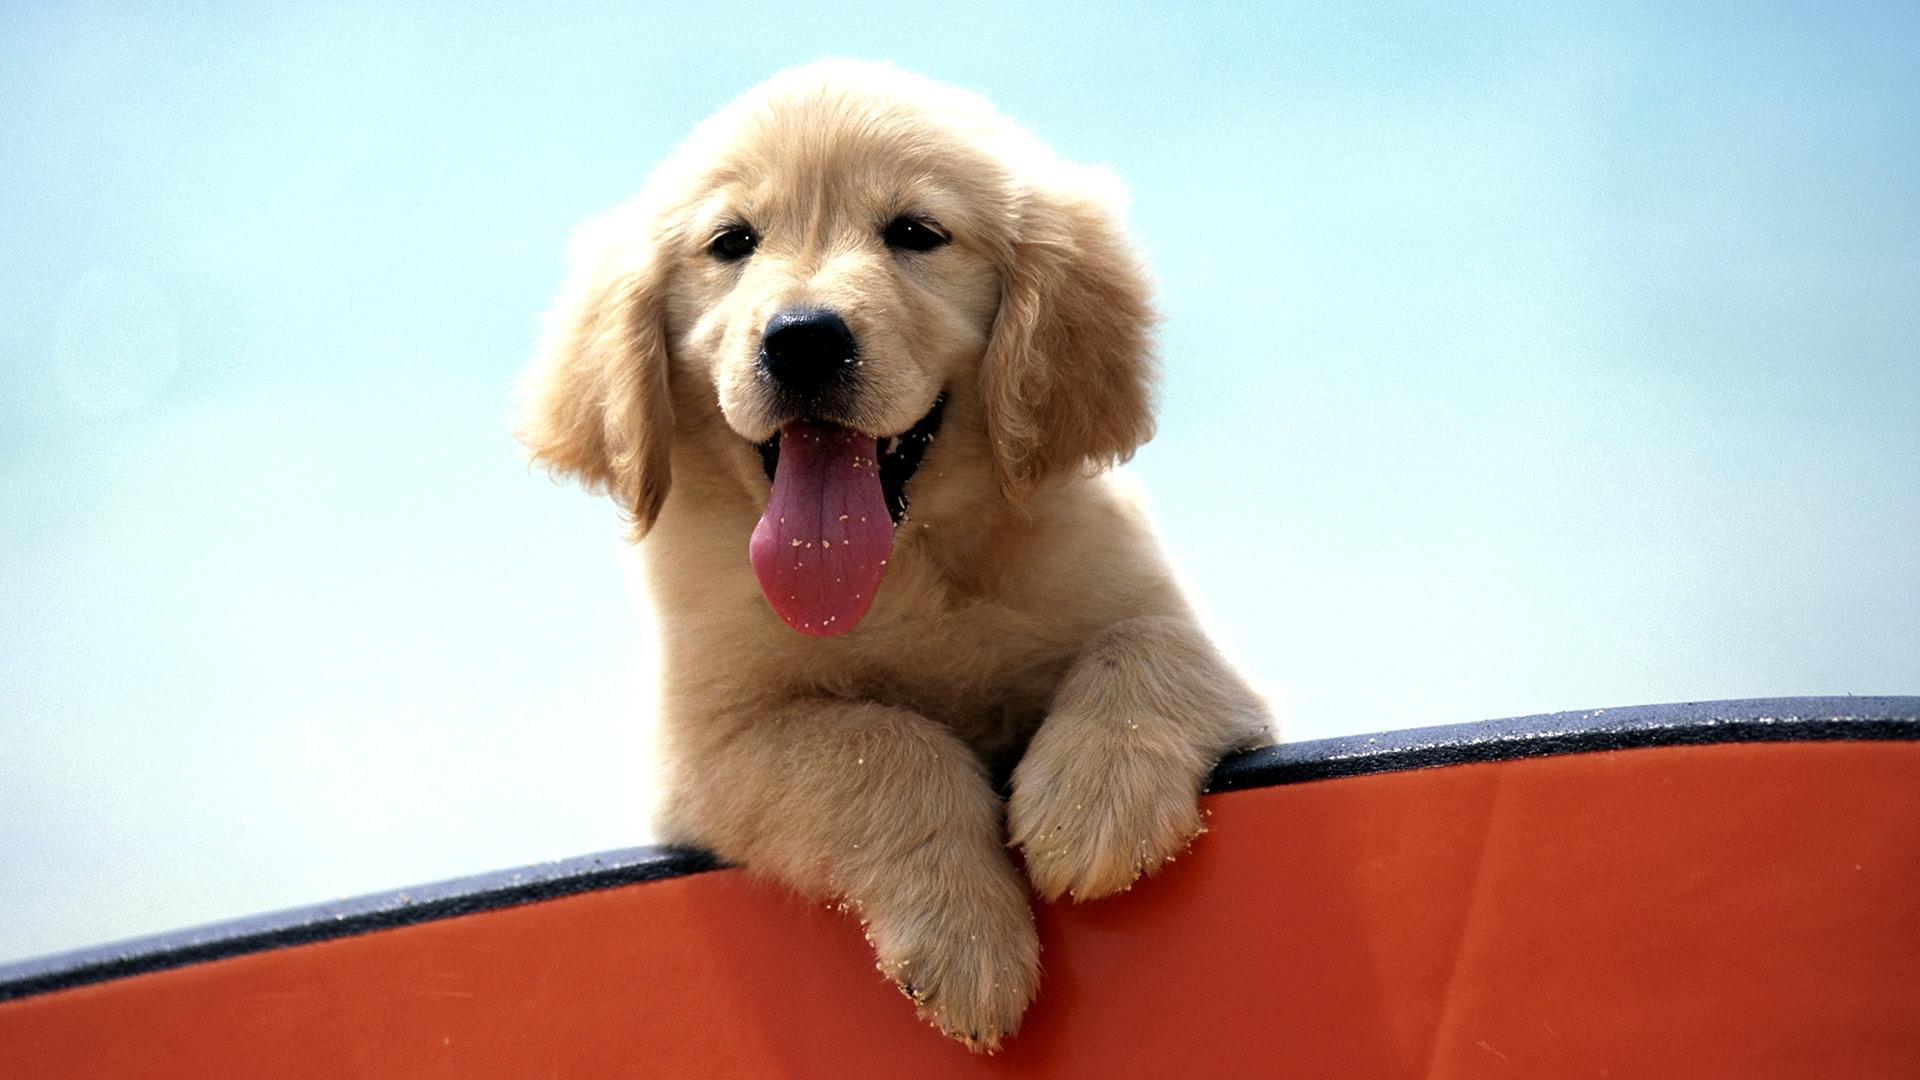 Golden Labrador Puppy - Puppy Sticking Its Tongue Out - HD Wallpaper 